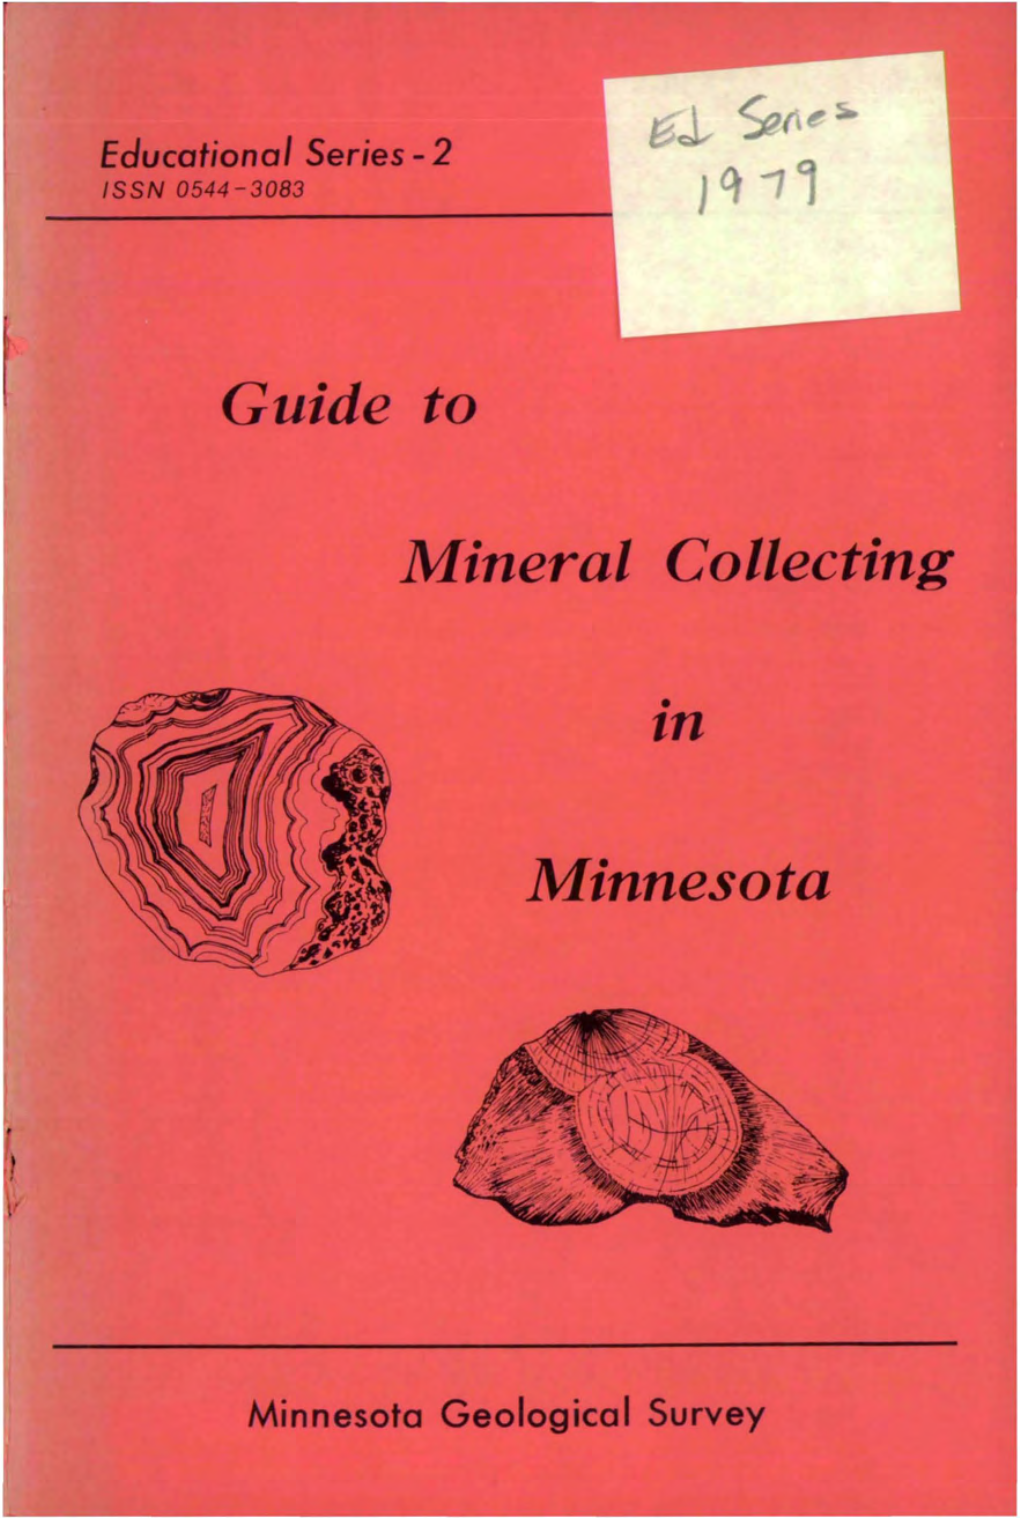 Guide to Mineral Collecting in Minnesota